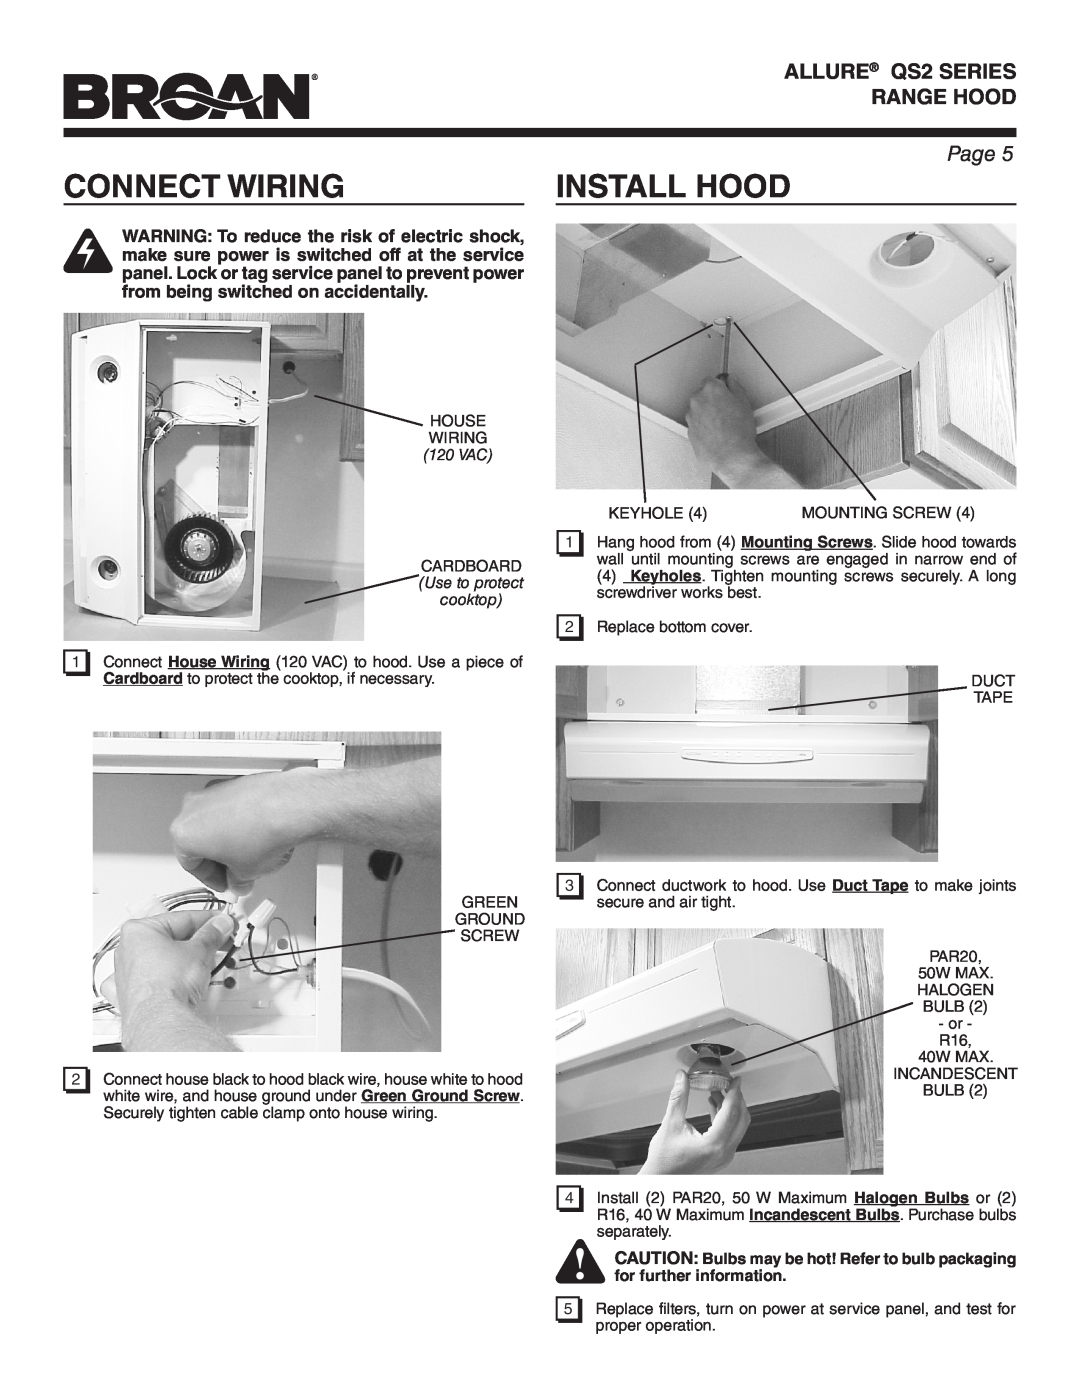 Broan QS242SS Connect Wiring, Install Hood, ALLURE QS2 SERIES, Range Hood, Page, from being switched on accidentally 